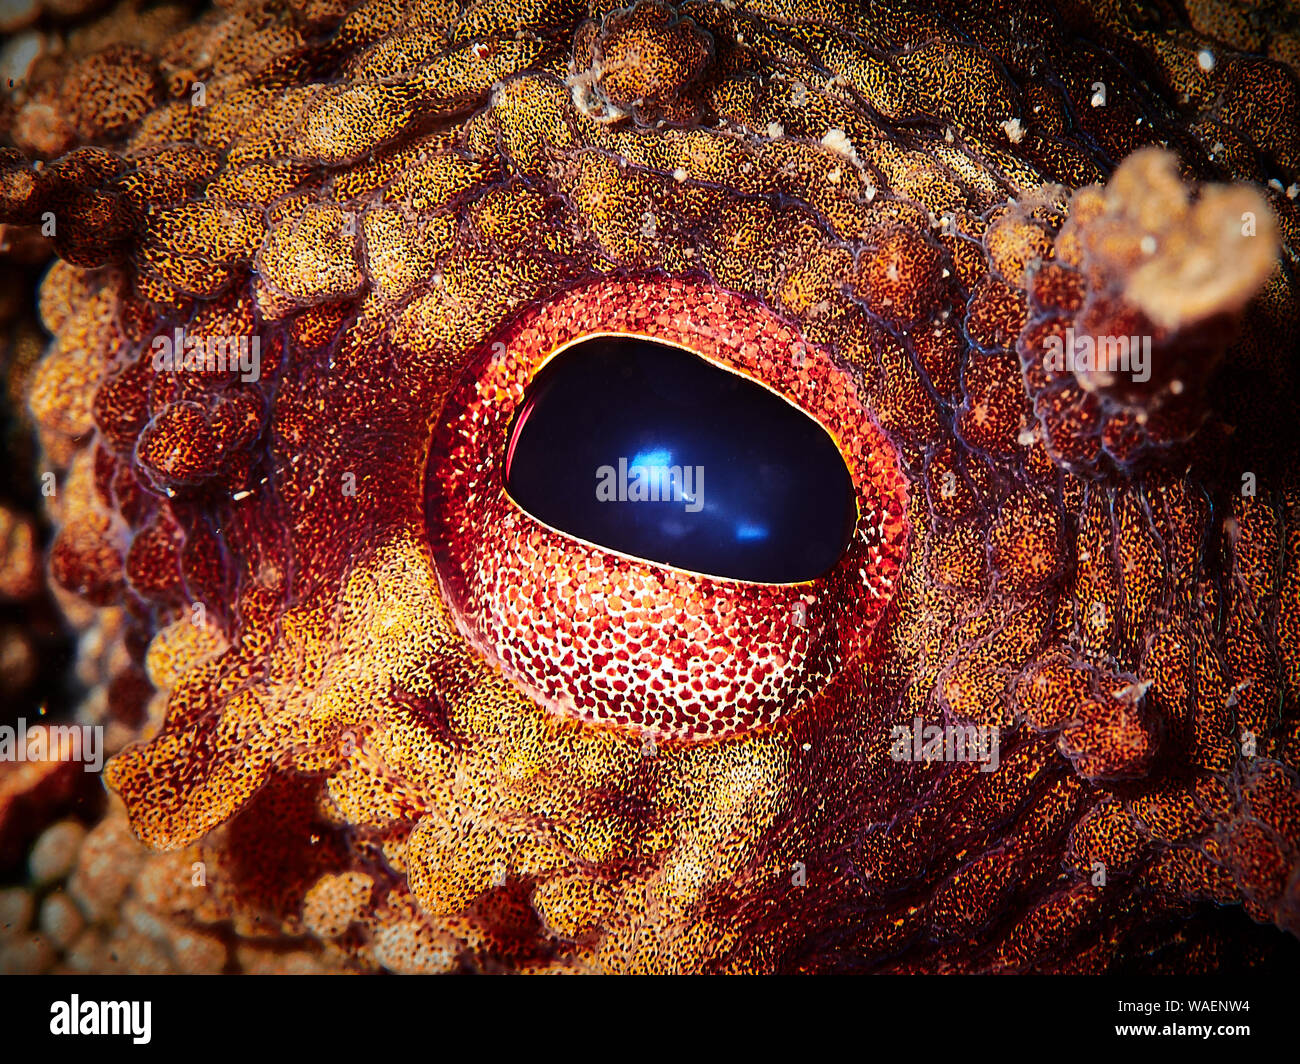 Close up photo of an octopus eye Stock Photo